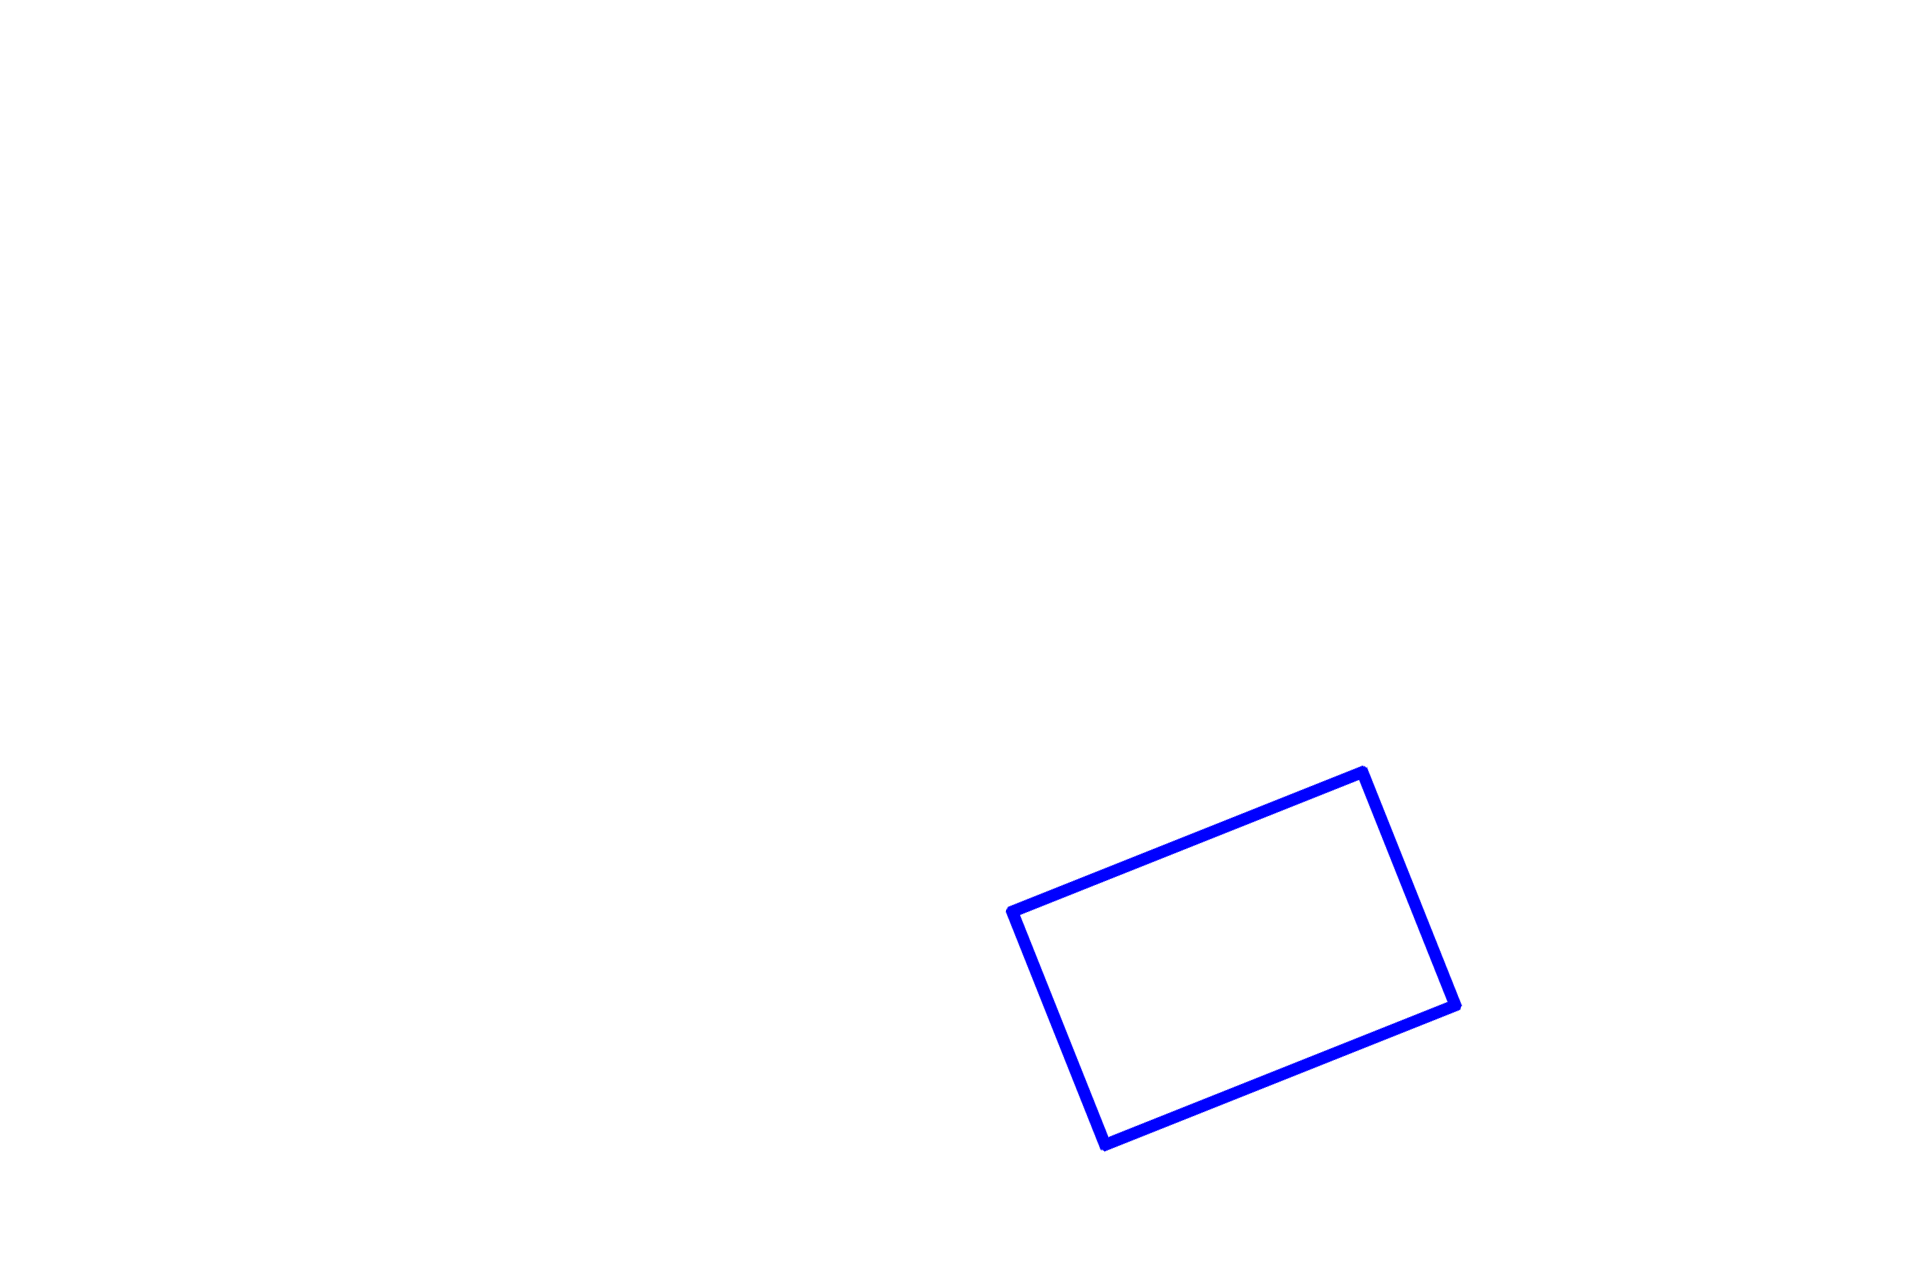 Area shown in next image <p>The area in the rectangle is shown at higher magnification in the next image.</p>
